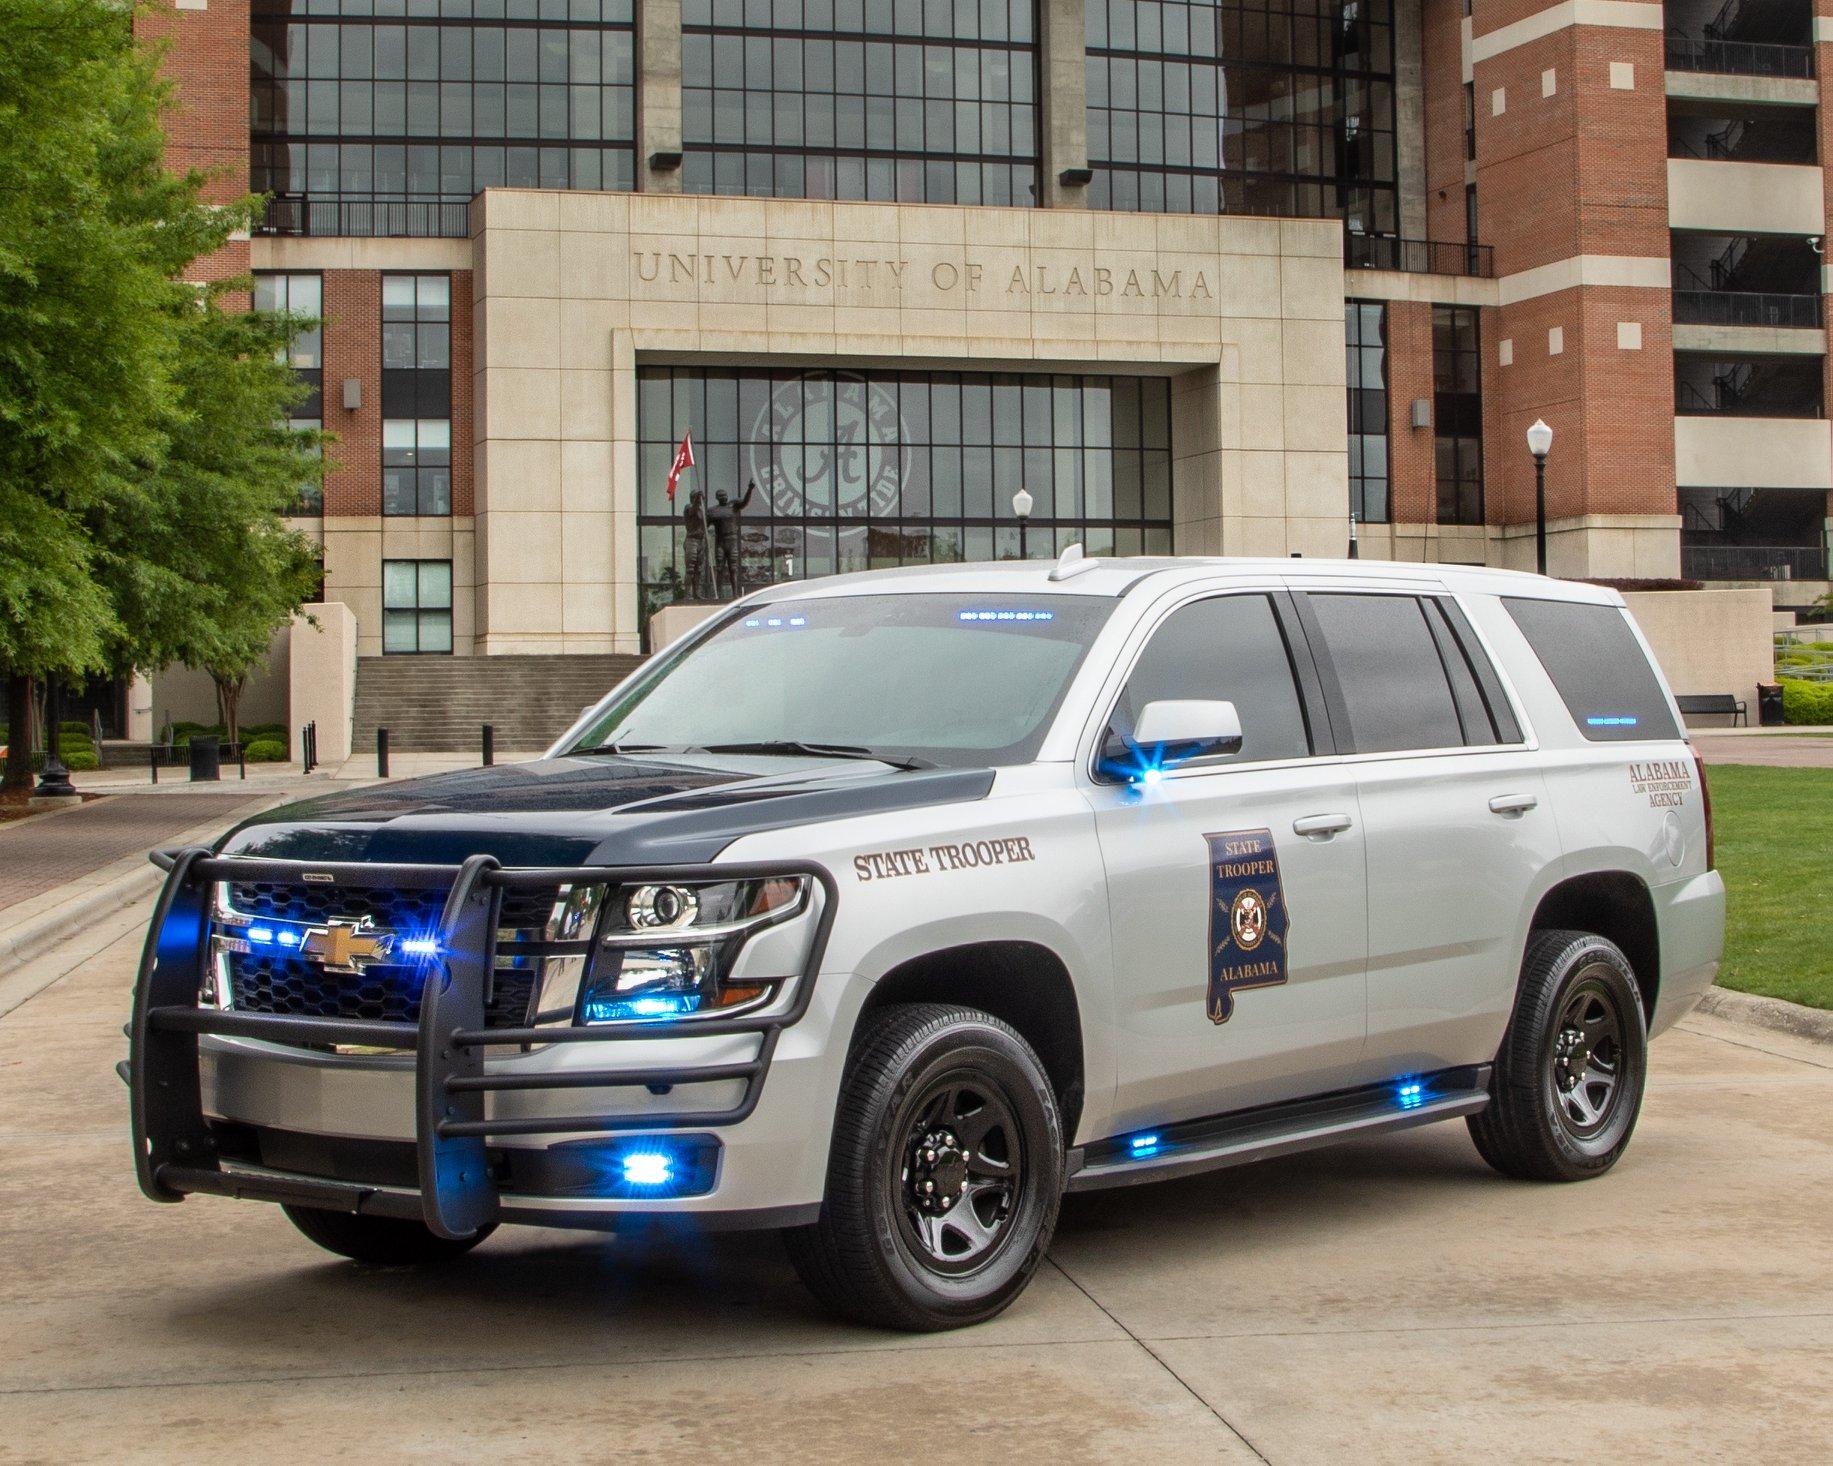 Photos: 48 states compete for best looking police cruiser (7.19.18) Augusta Chronicle, GA